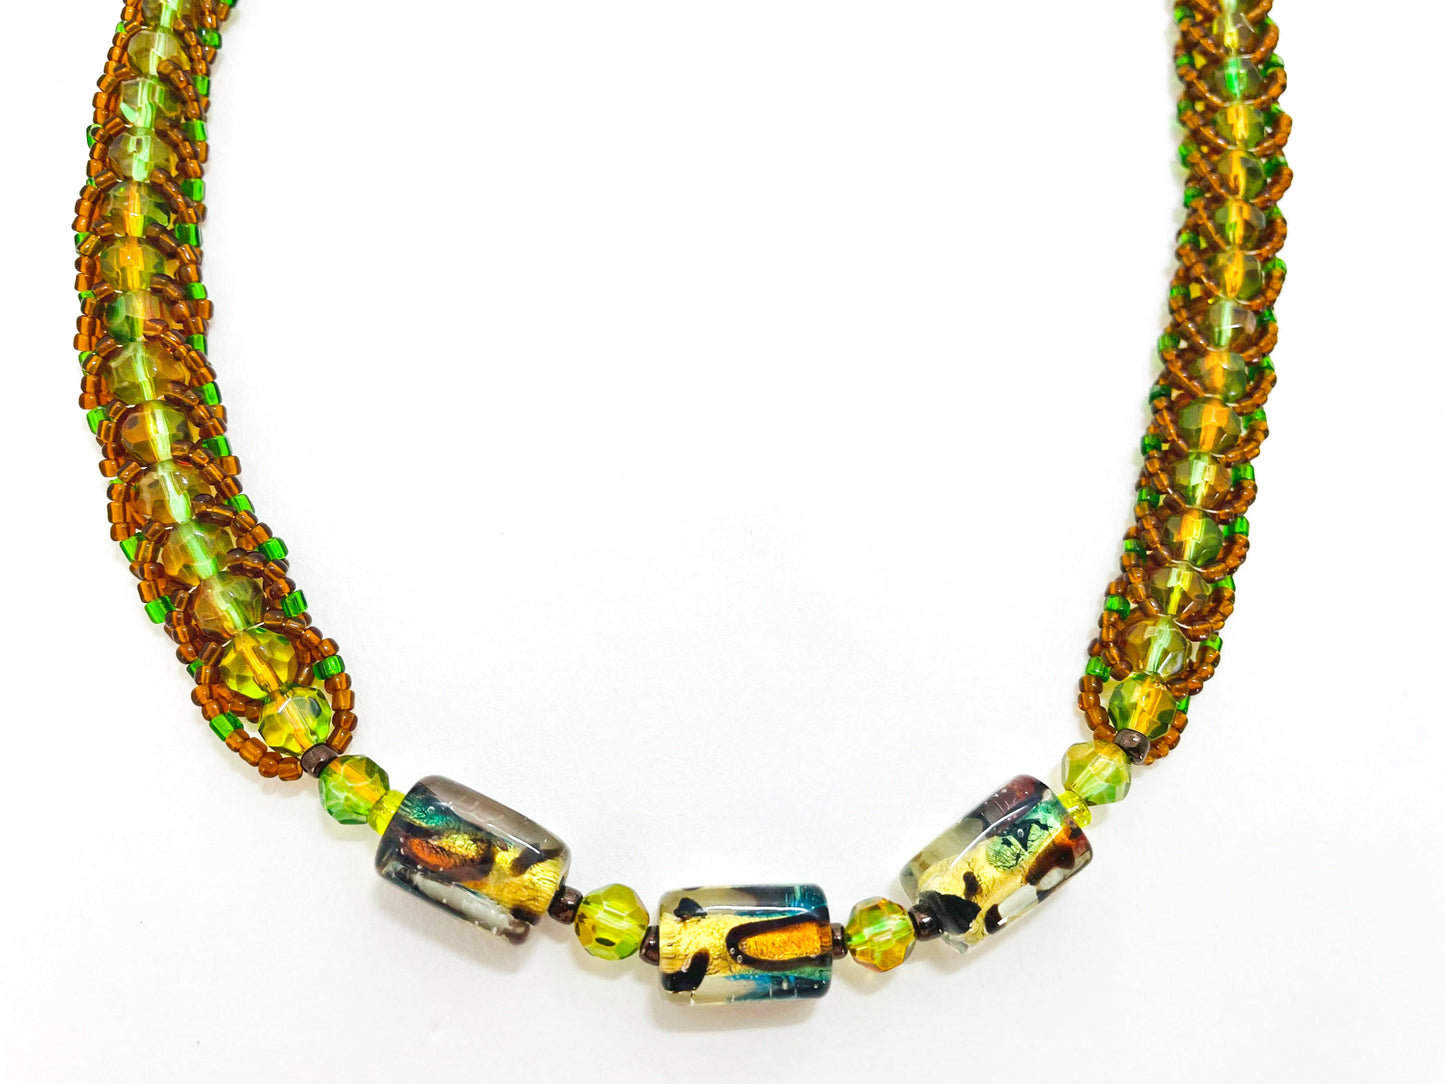 Handcrafted Necklaces by Linda